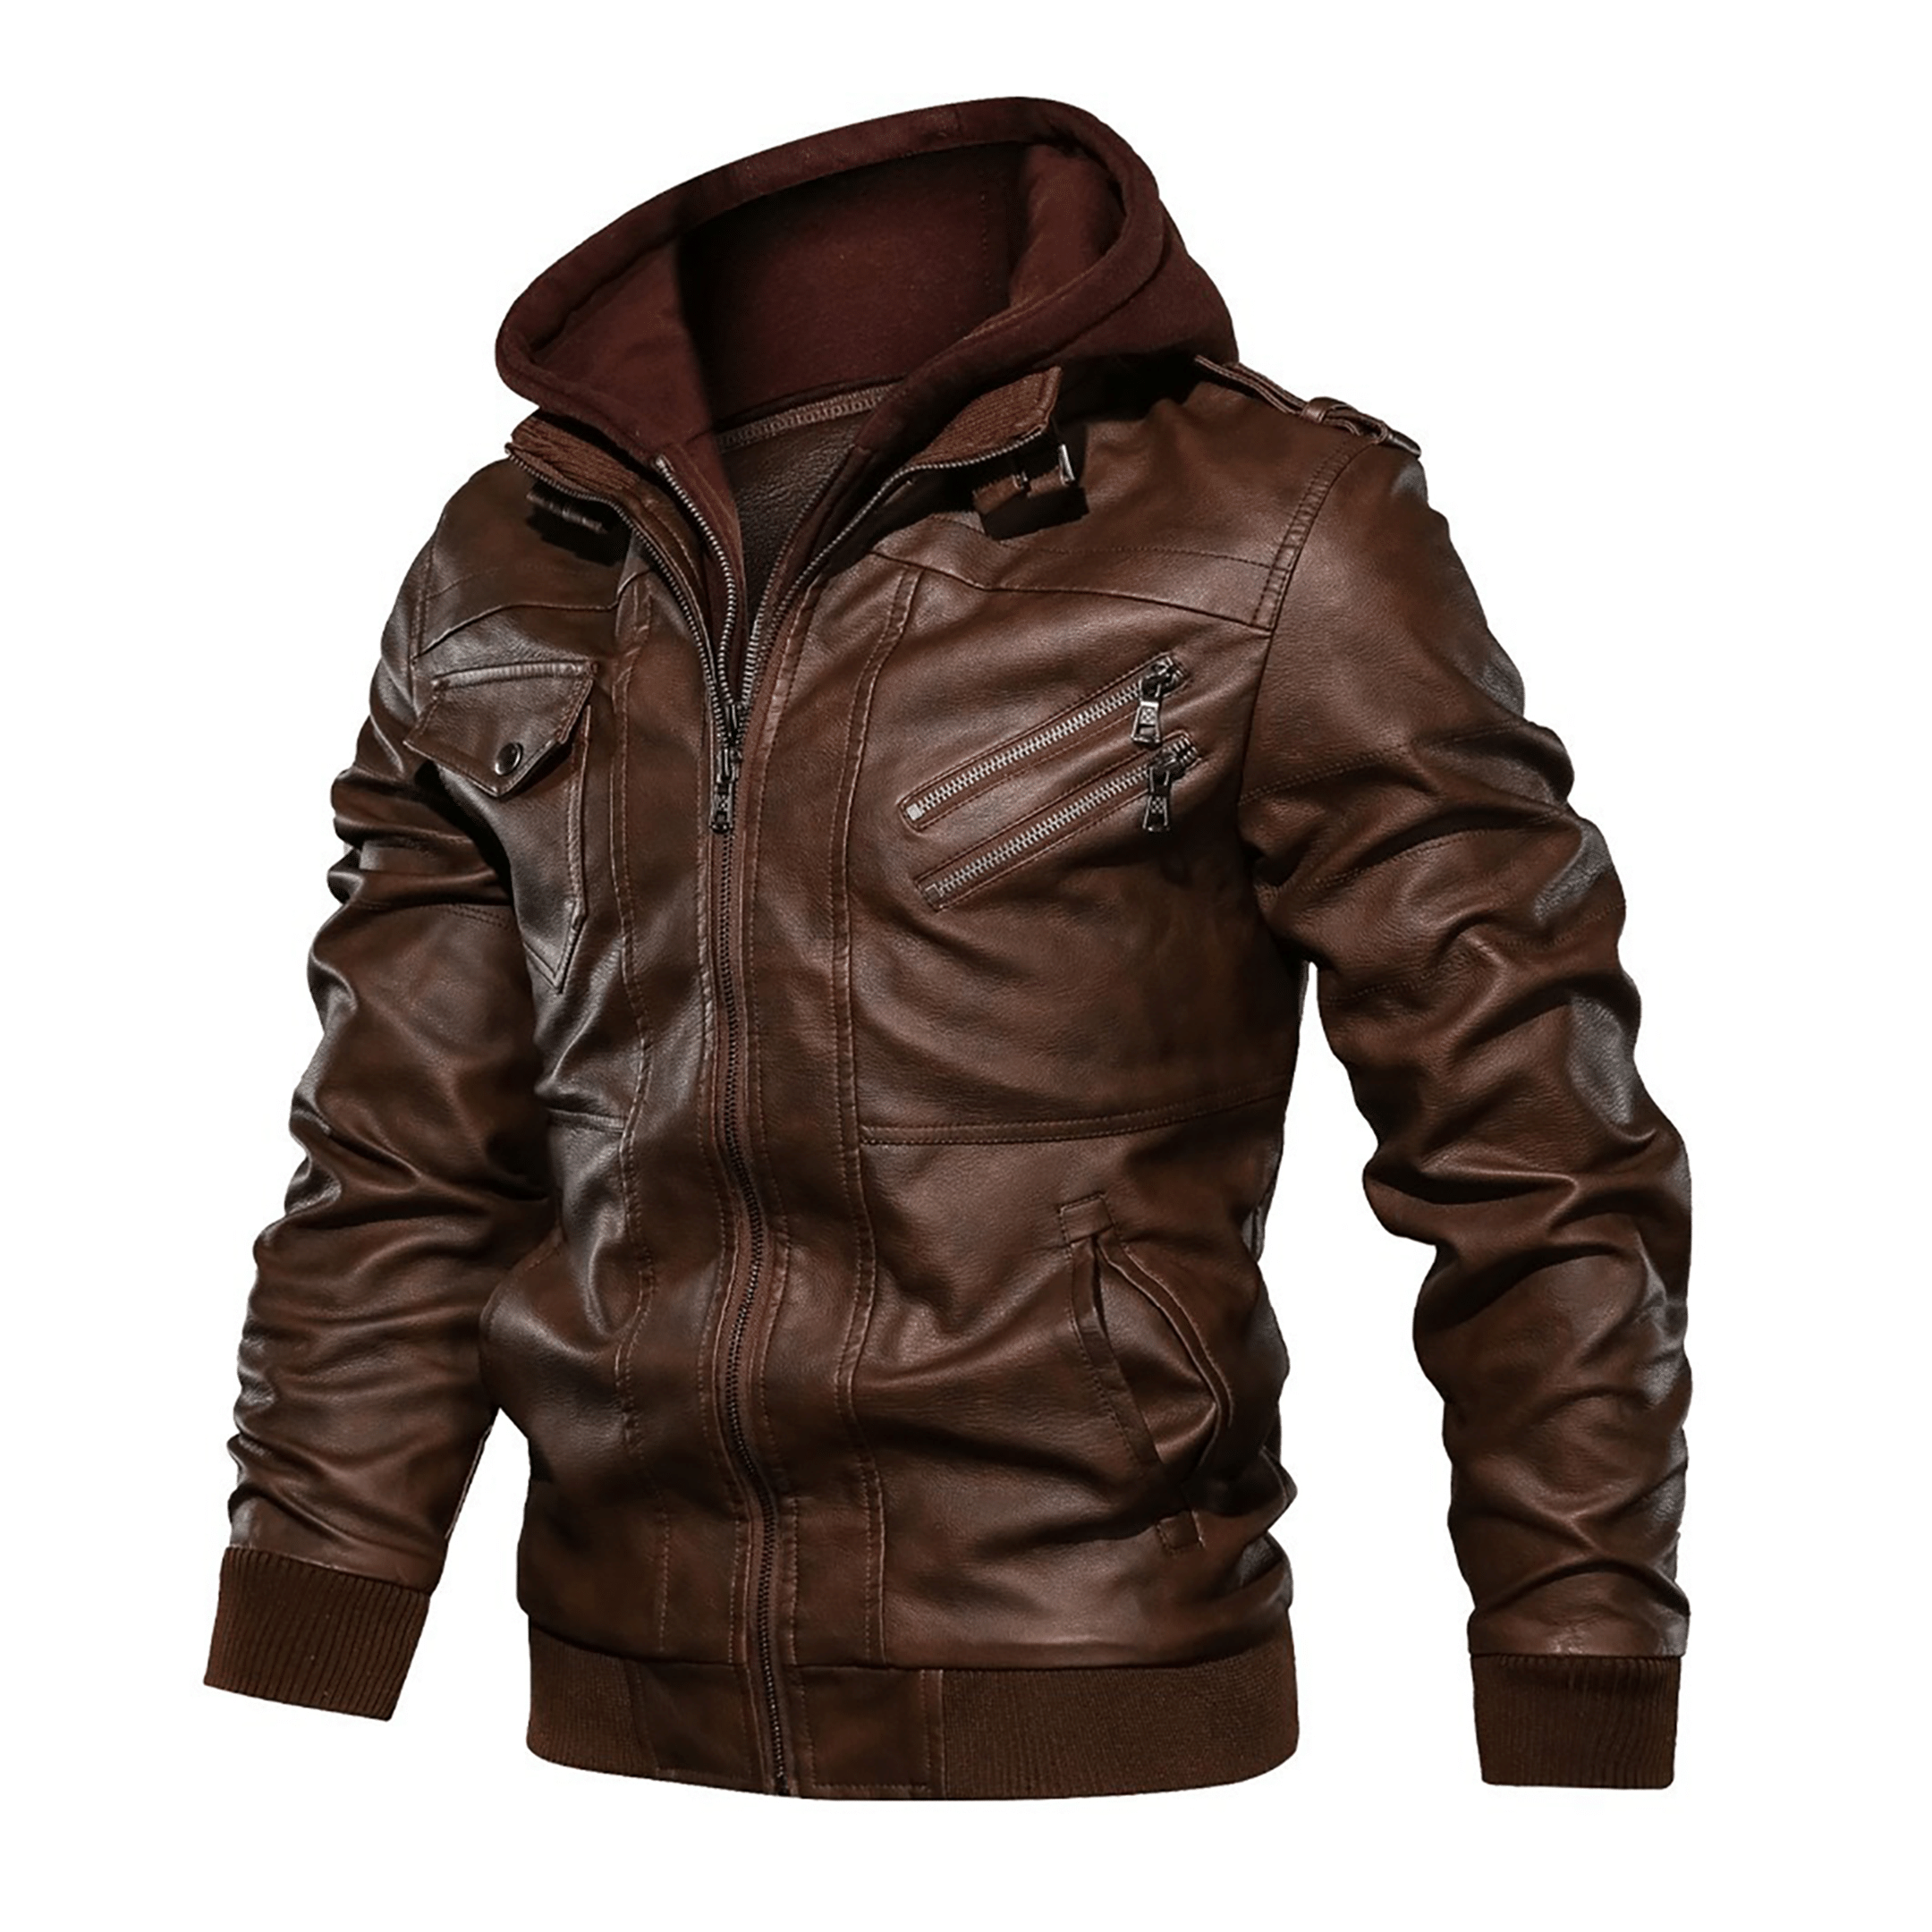 Top leather jackets and latest products 89